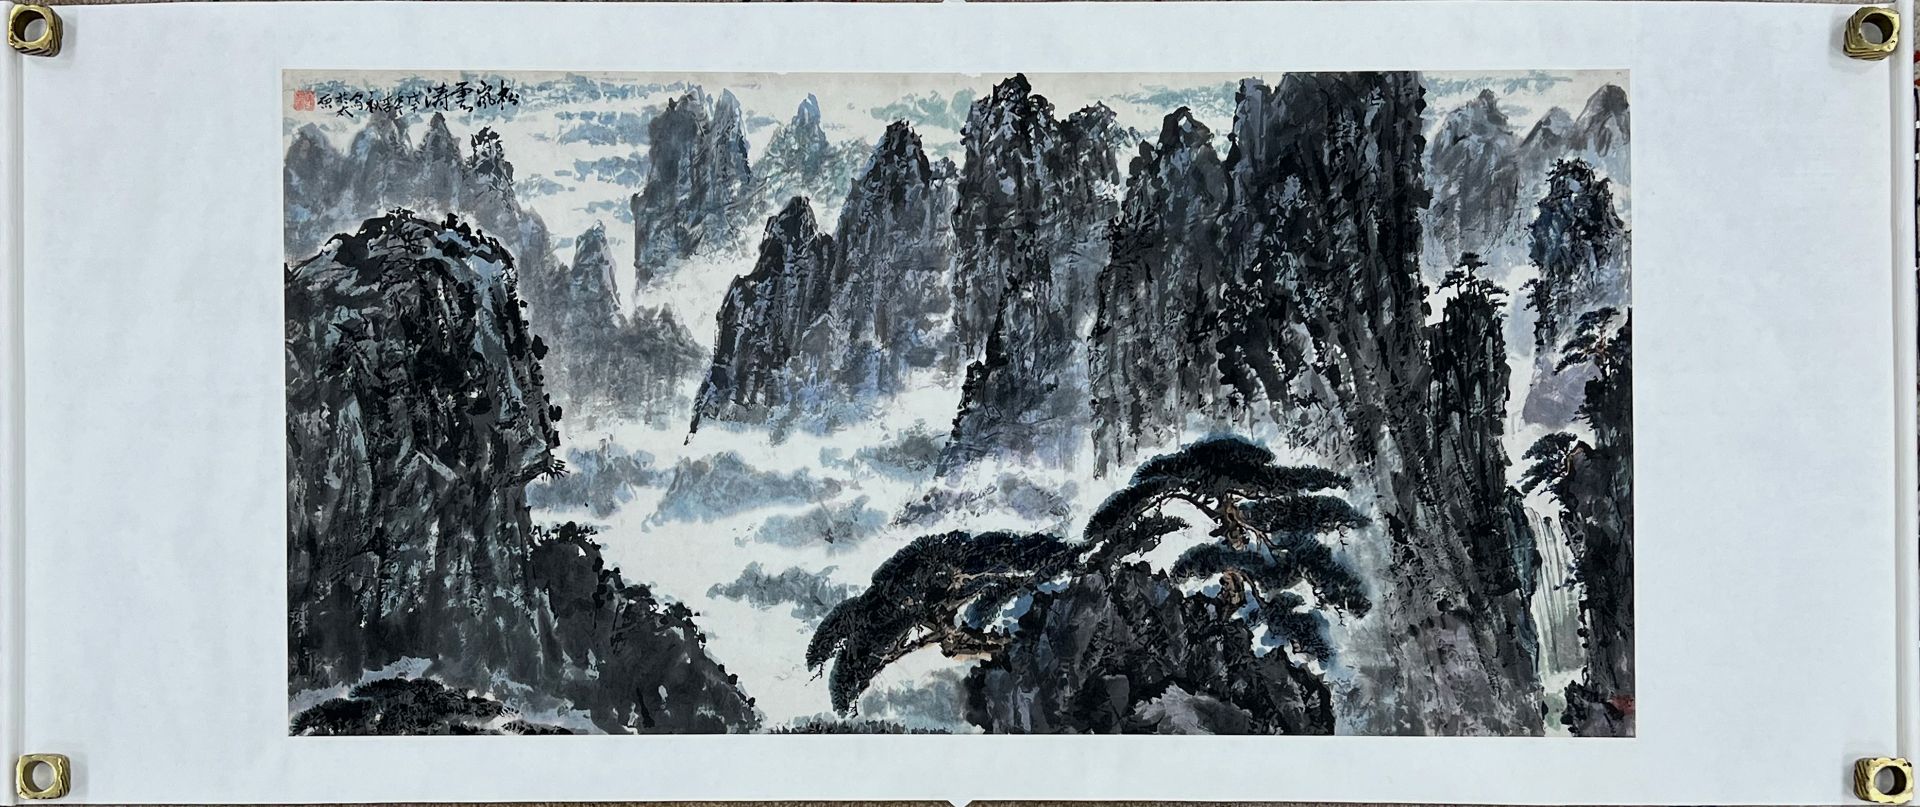 HOU, Xiangqing (1948). Chinese landscape with mountains.